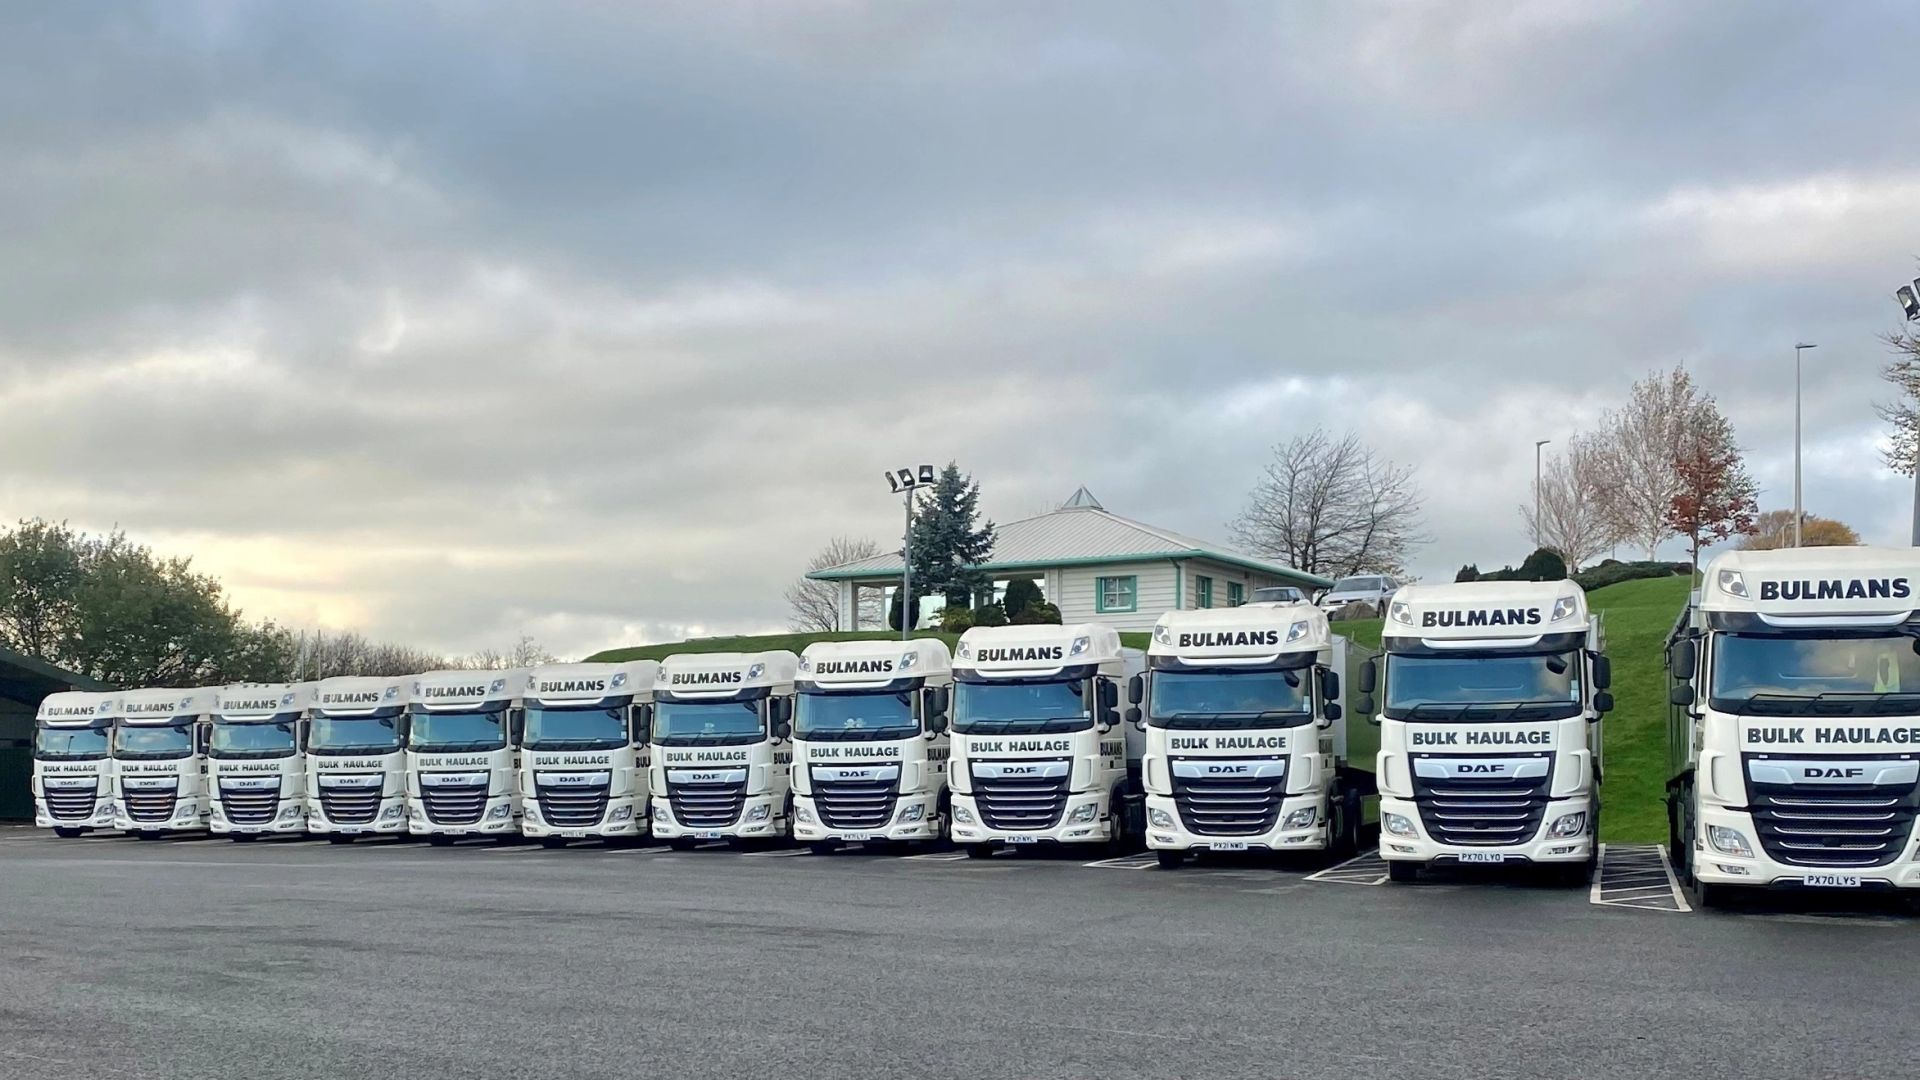 A lineup of Bulmans Bulk Haulage vehicles, showcasing a fleet of white DAF trucks with the company logo, ready for nationwide transport services.